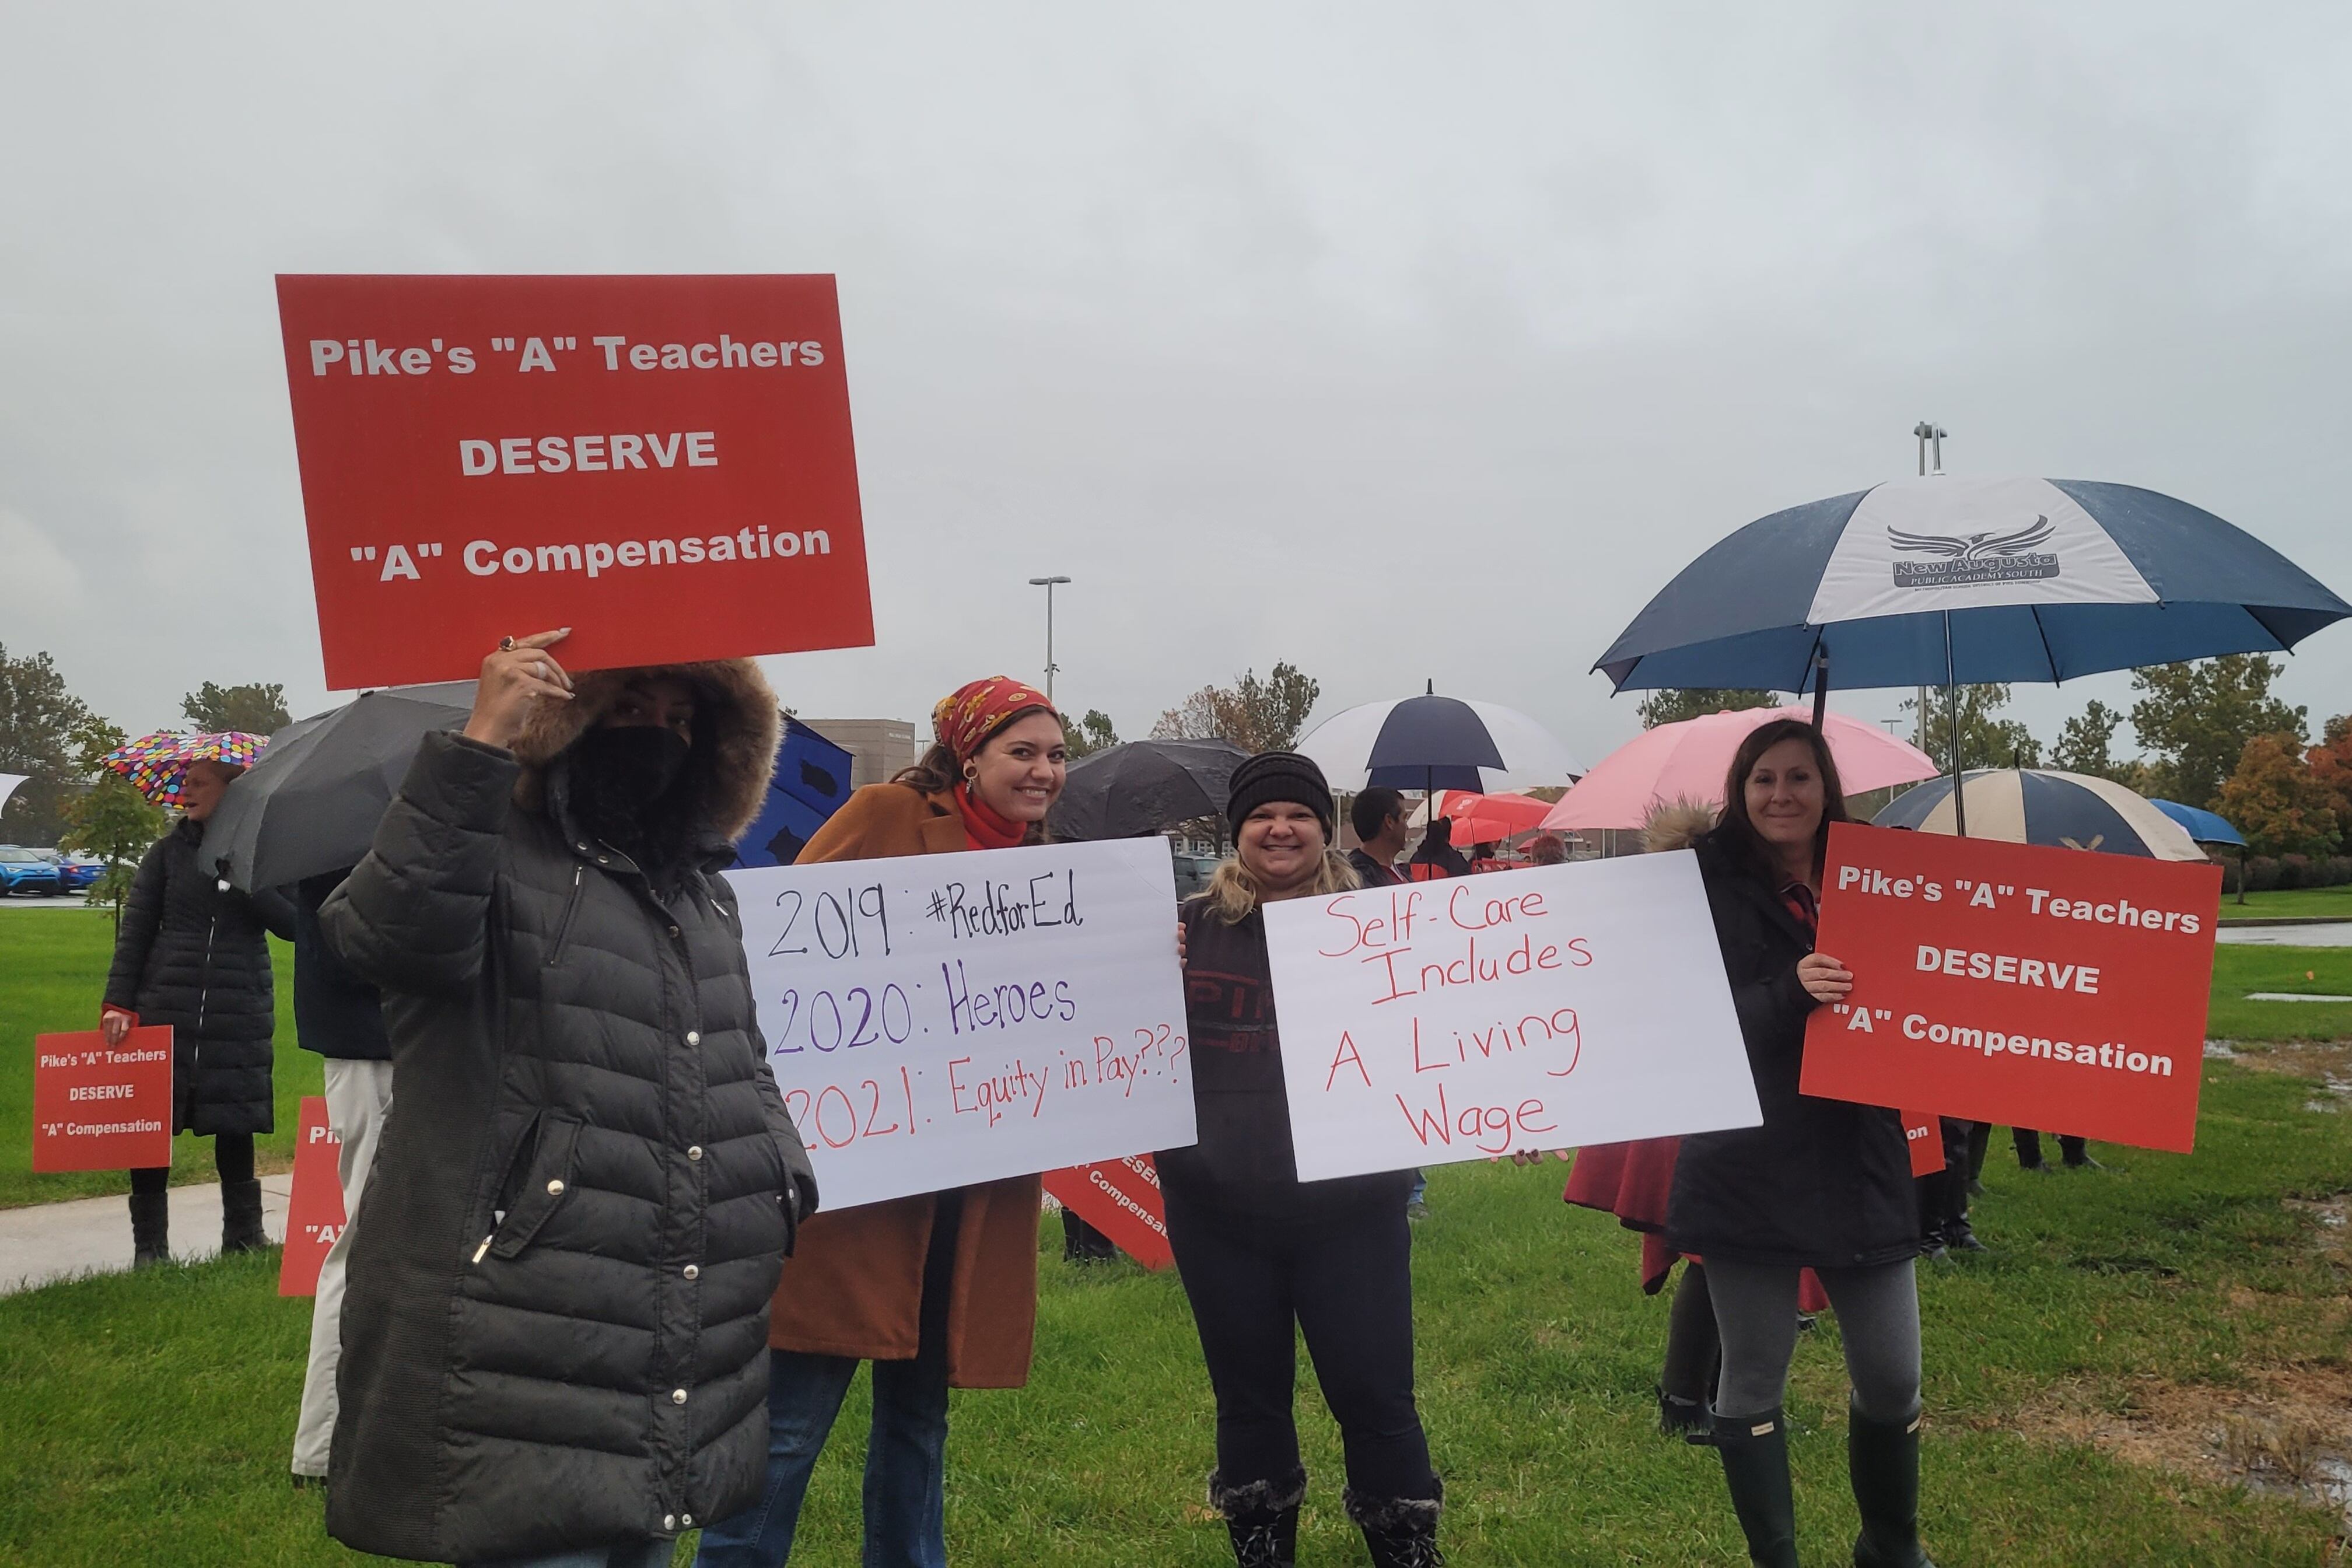 A group of people in coats and some with umbrellas stand with placards. One reads “Pike’s ‘A’ teachers deserve ‘A’ compensation” and “2019 Red for Ed, 2020 Heroes, 2021 Equity in Pay???”